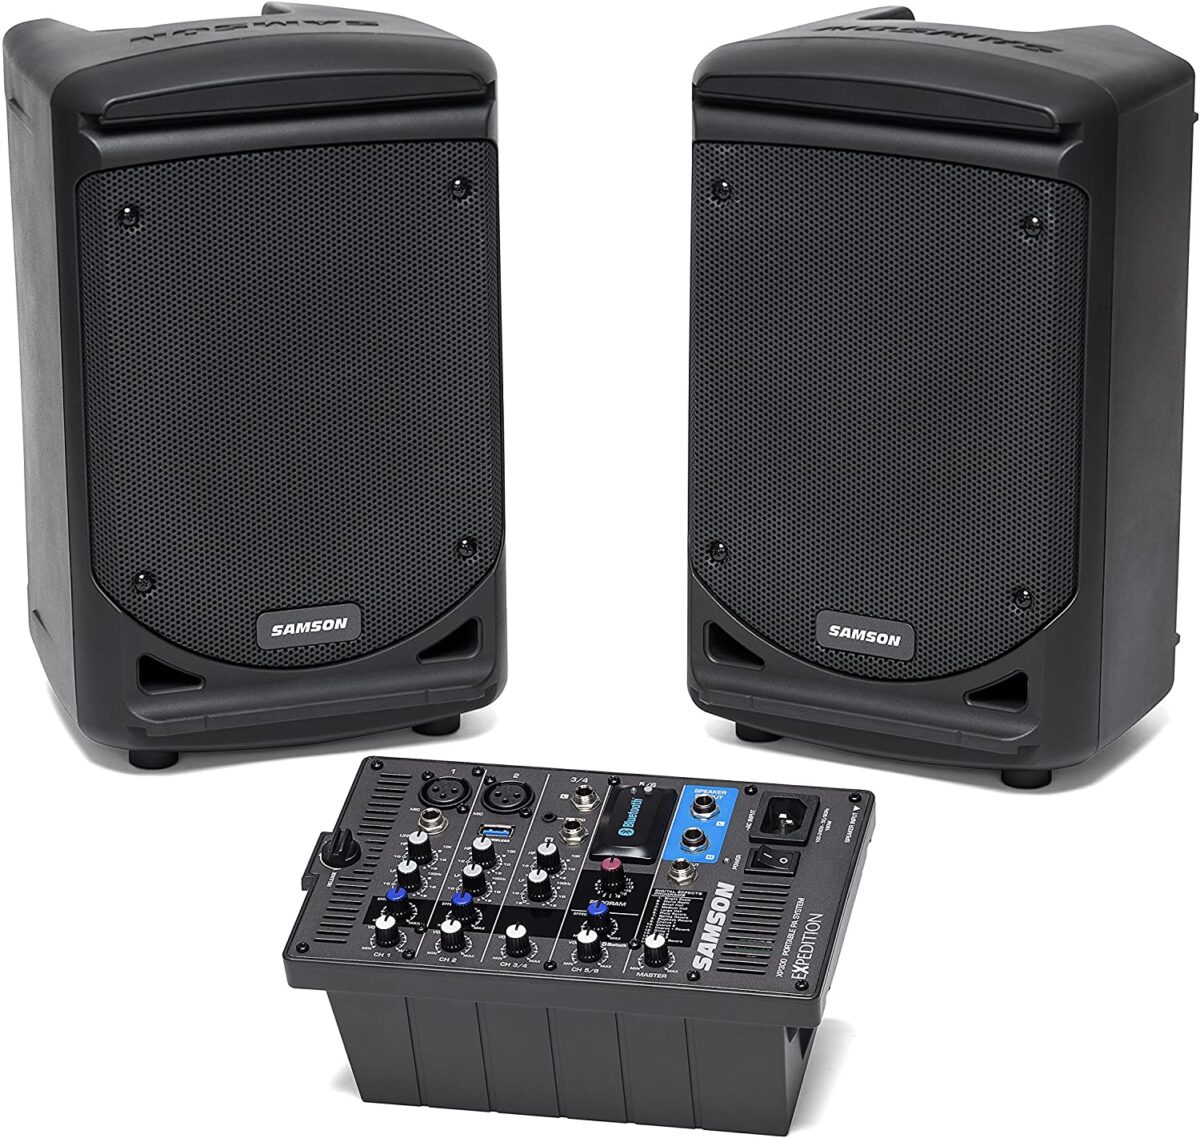 Guide for Choosing the Best PA System for Acoustic Guitar and Vocals